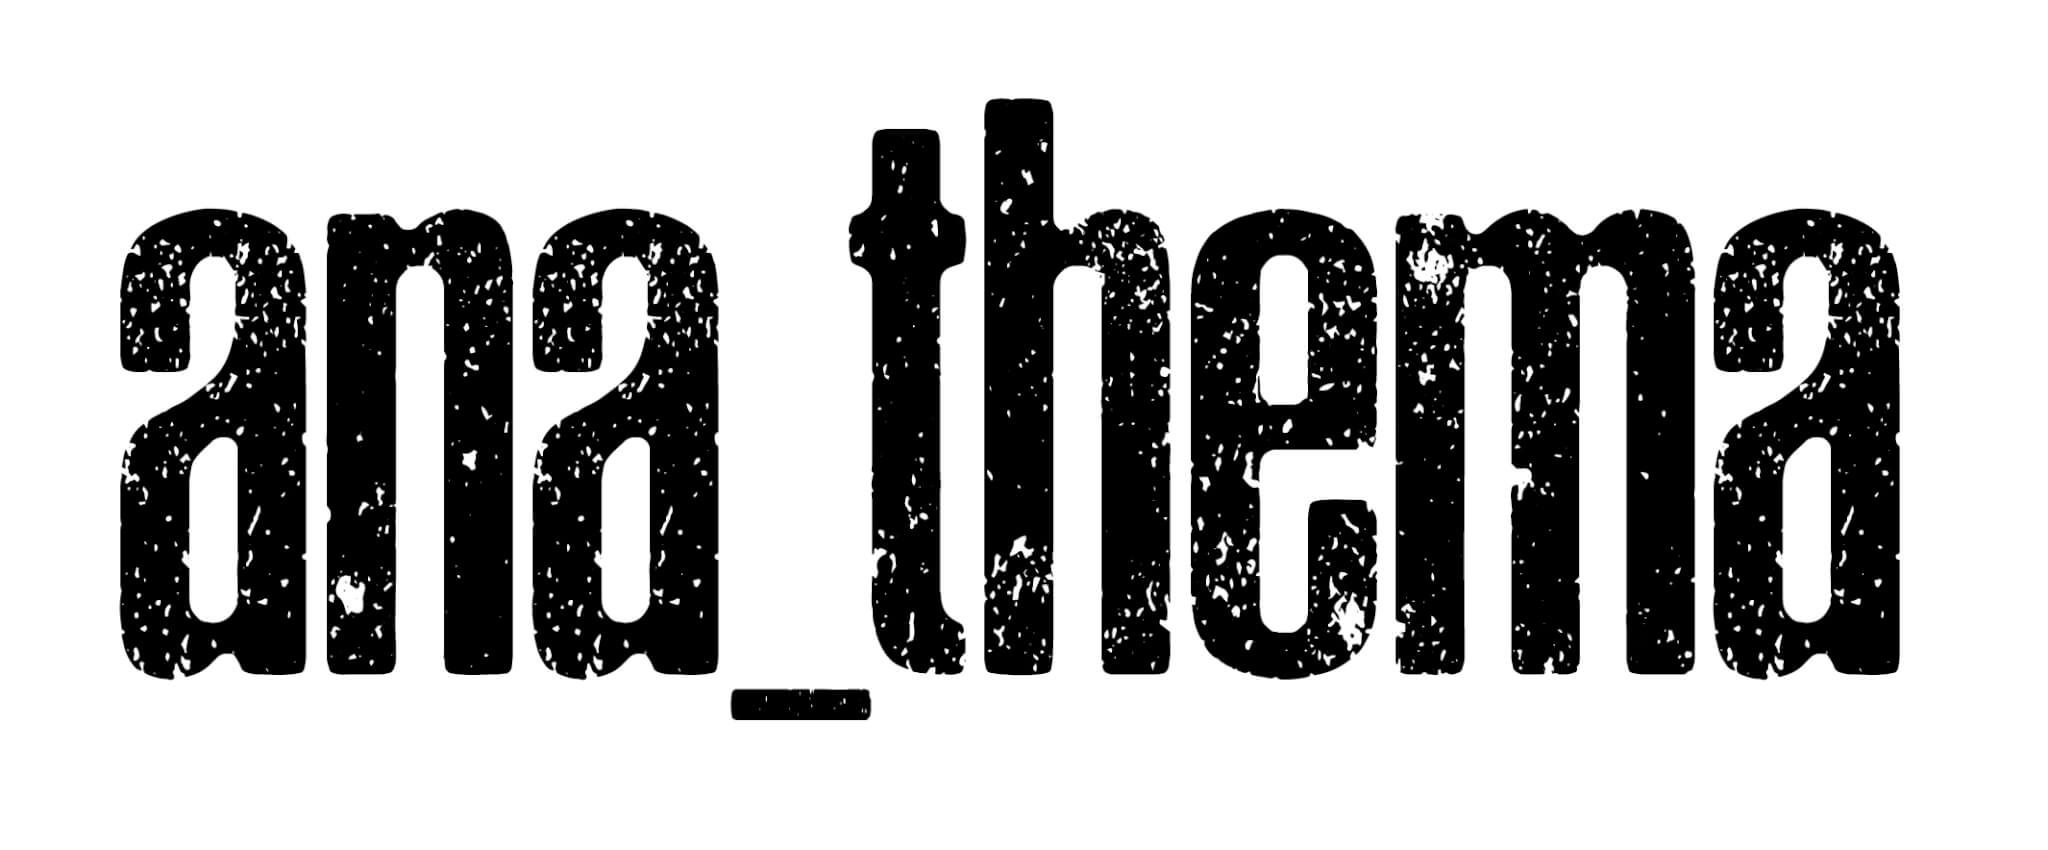 Read more about the article ANATHEMA announced the end of their career! :-(